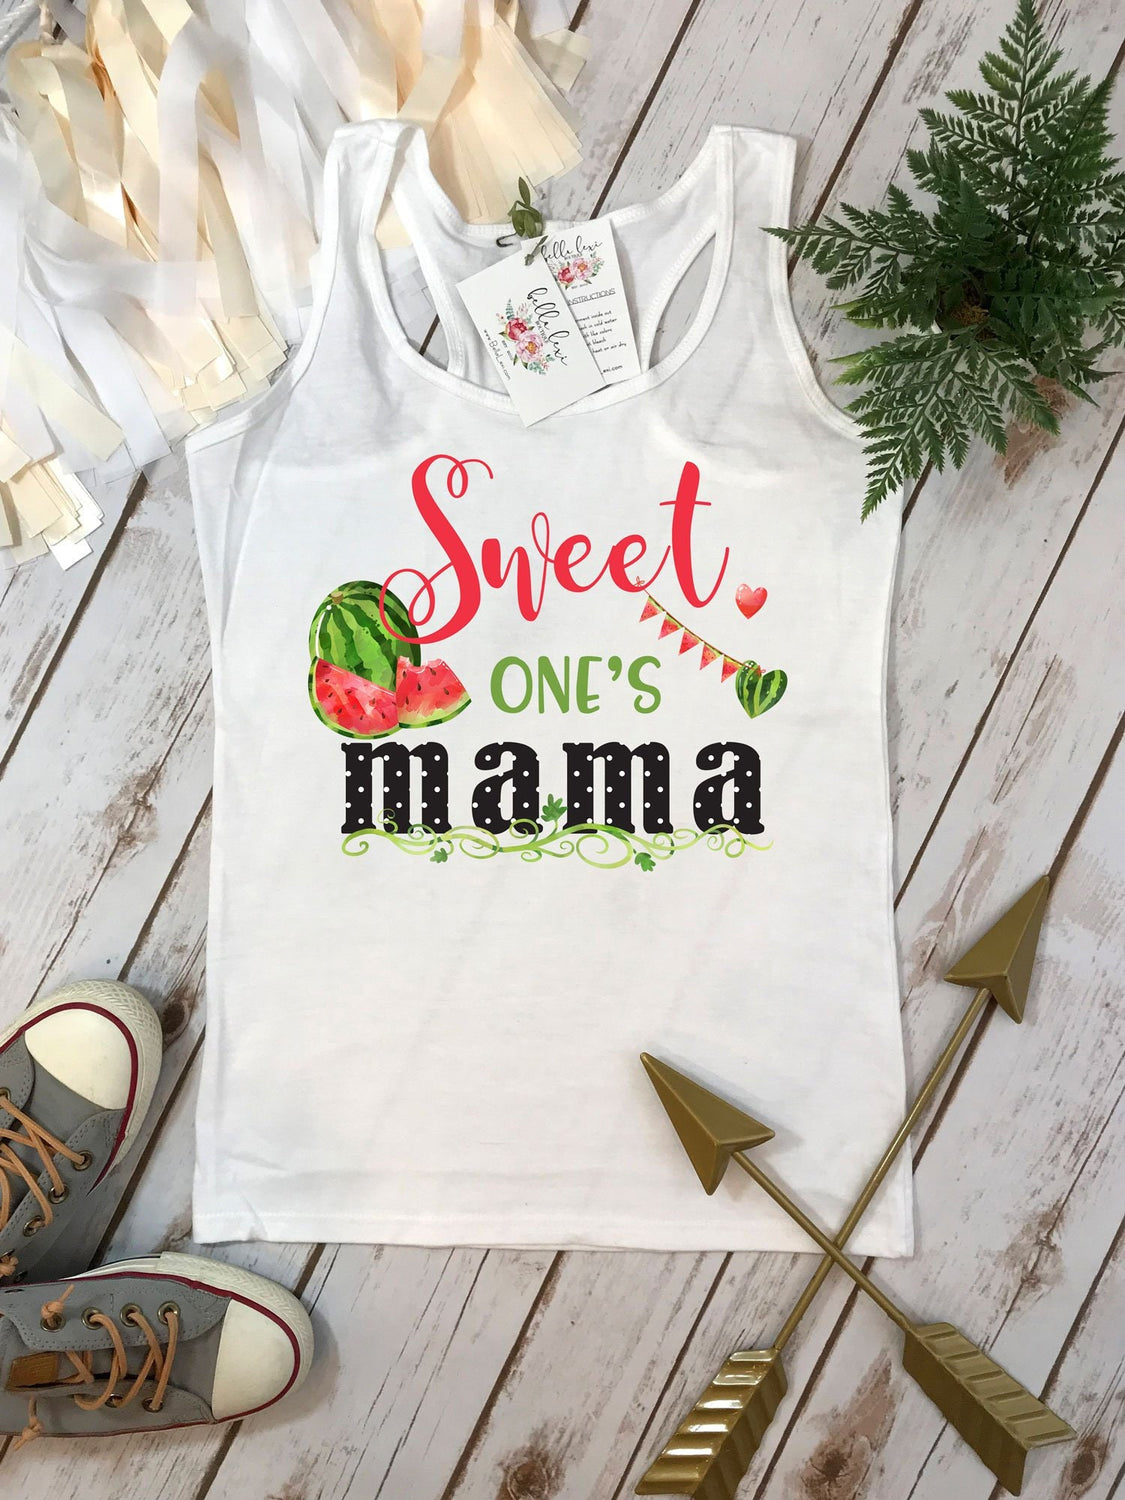 Watermelon Party, Watermelon Birthday, Mommy and Me shirts, Mommy and Me Outfits, One in a Melon Birthday, Mom Shirts, Sweet to be One Party